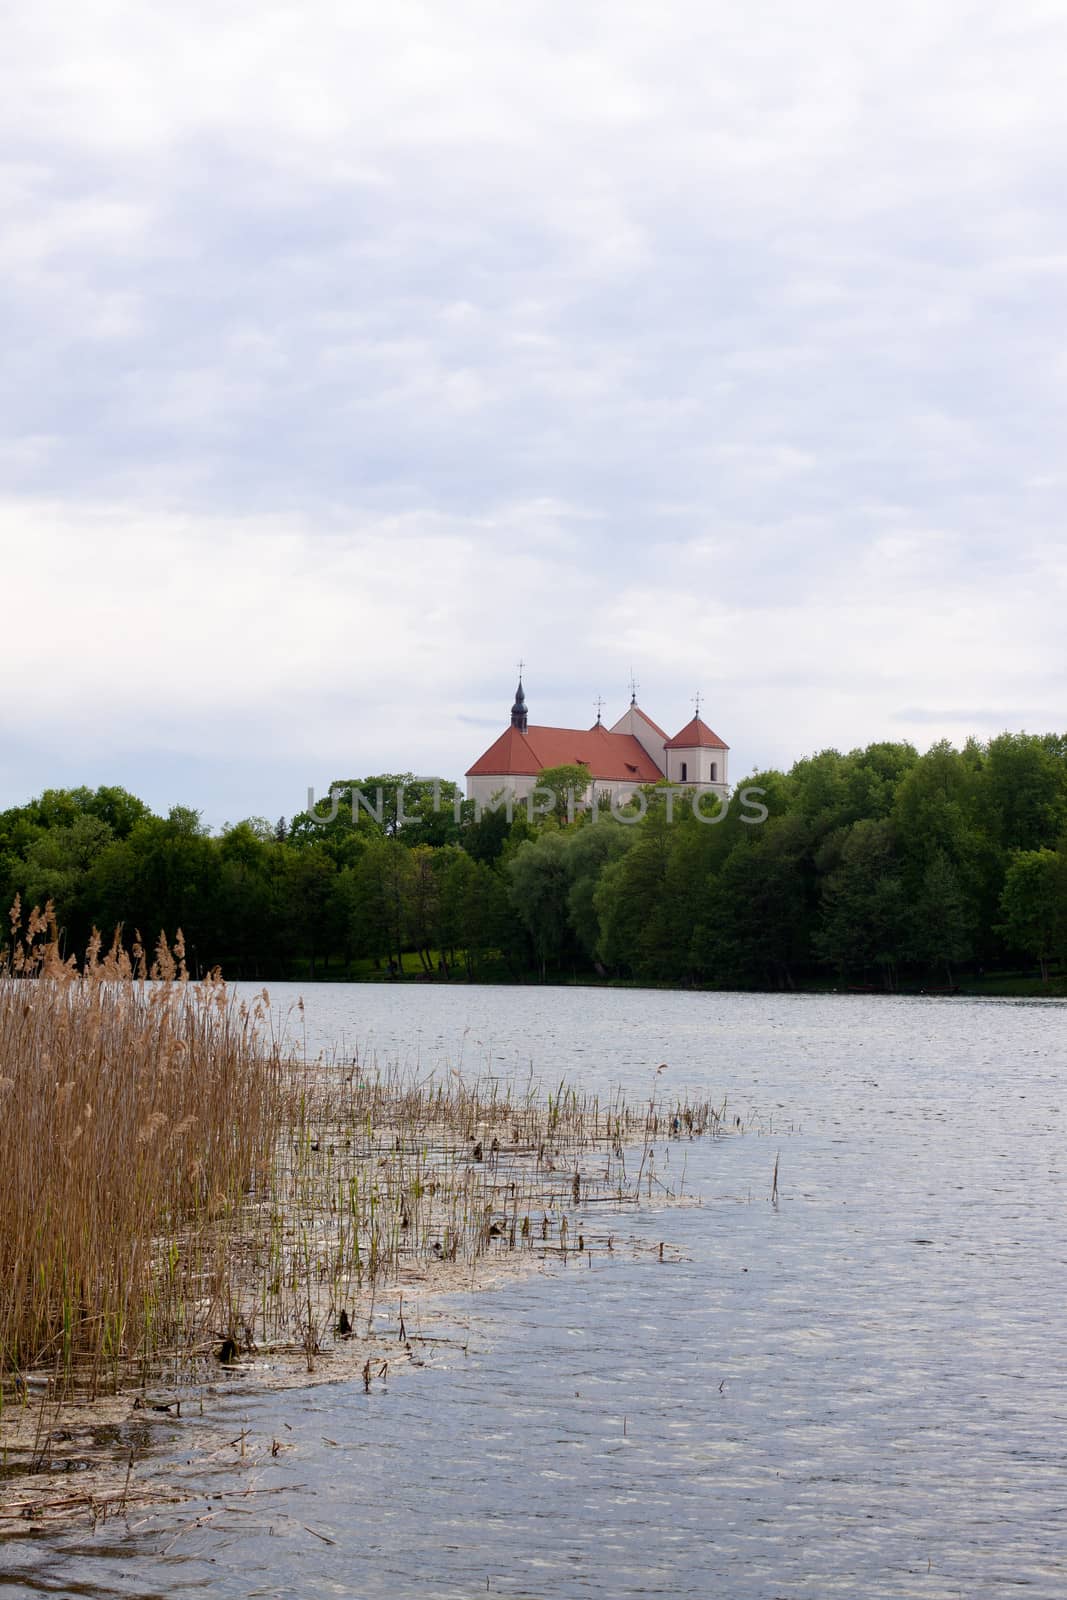 A landscape with lake and Trakaj castle in Lithuania
